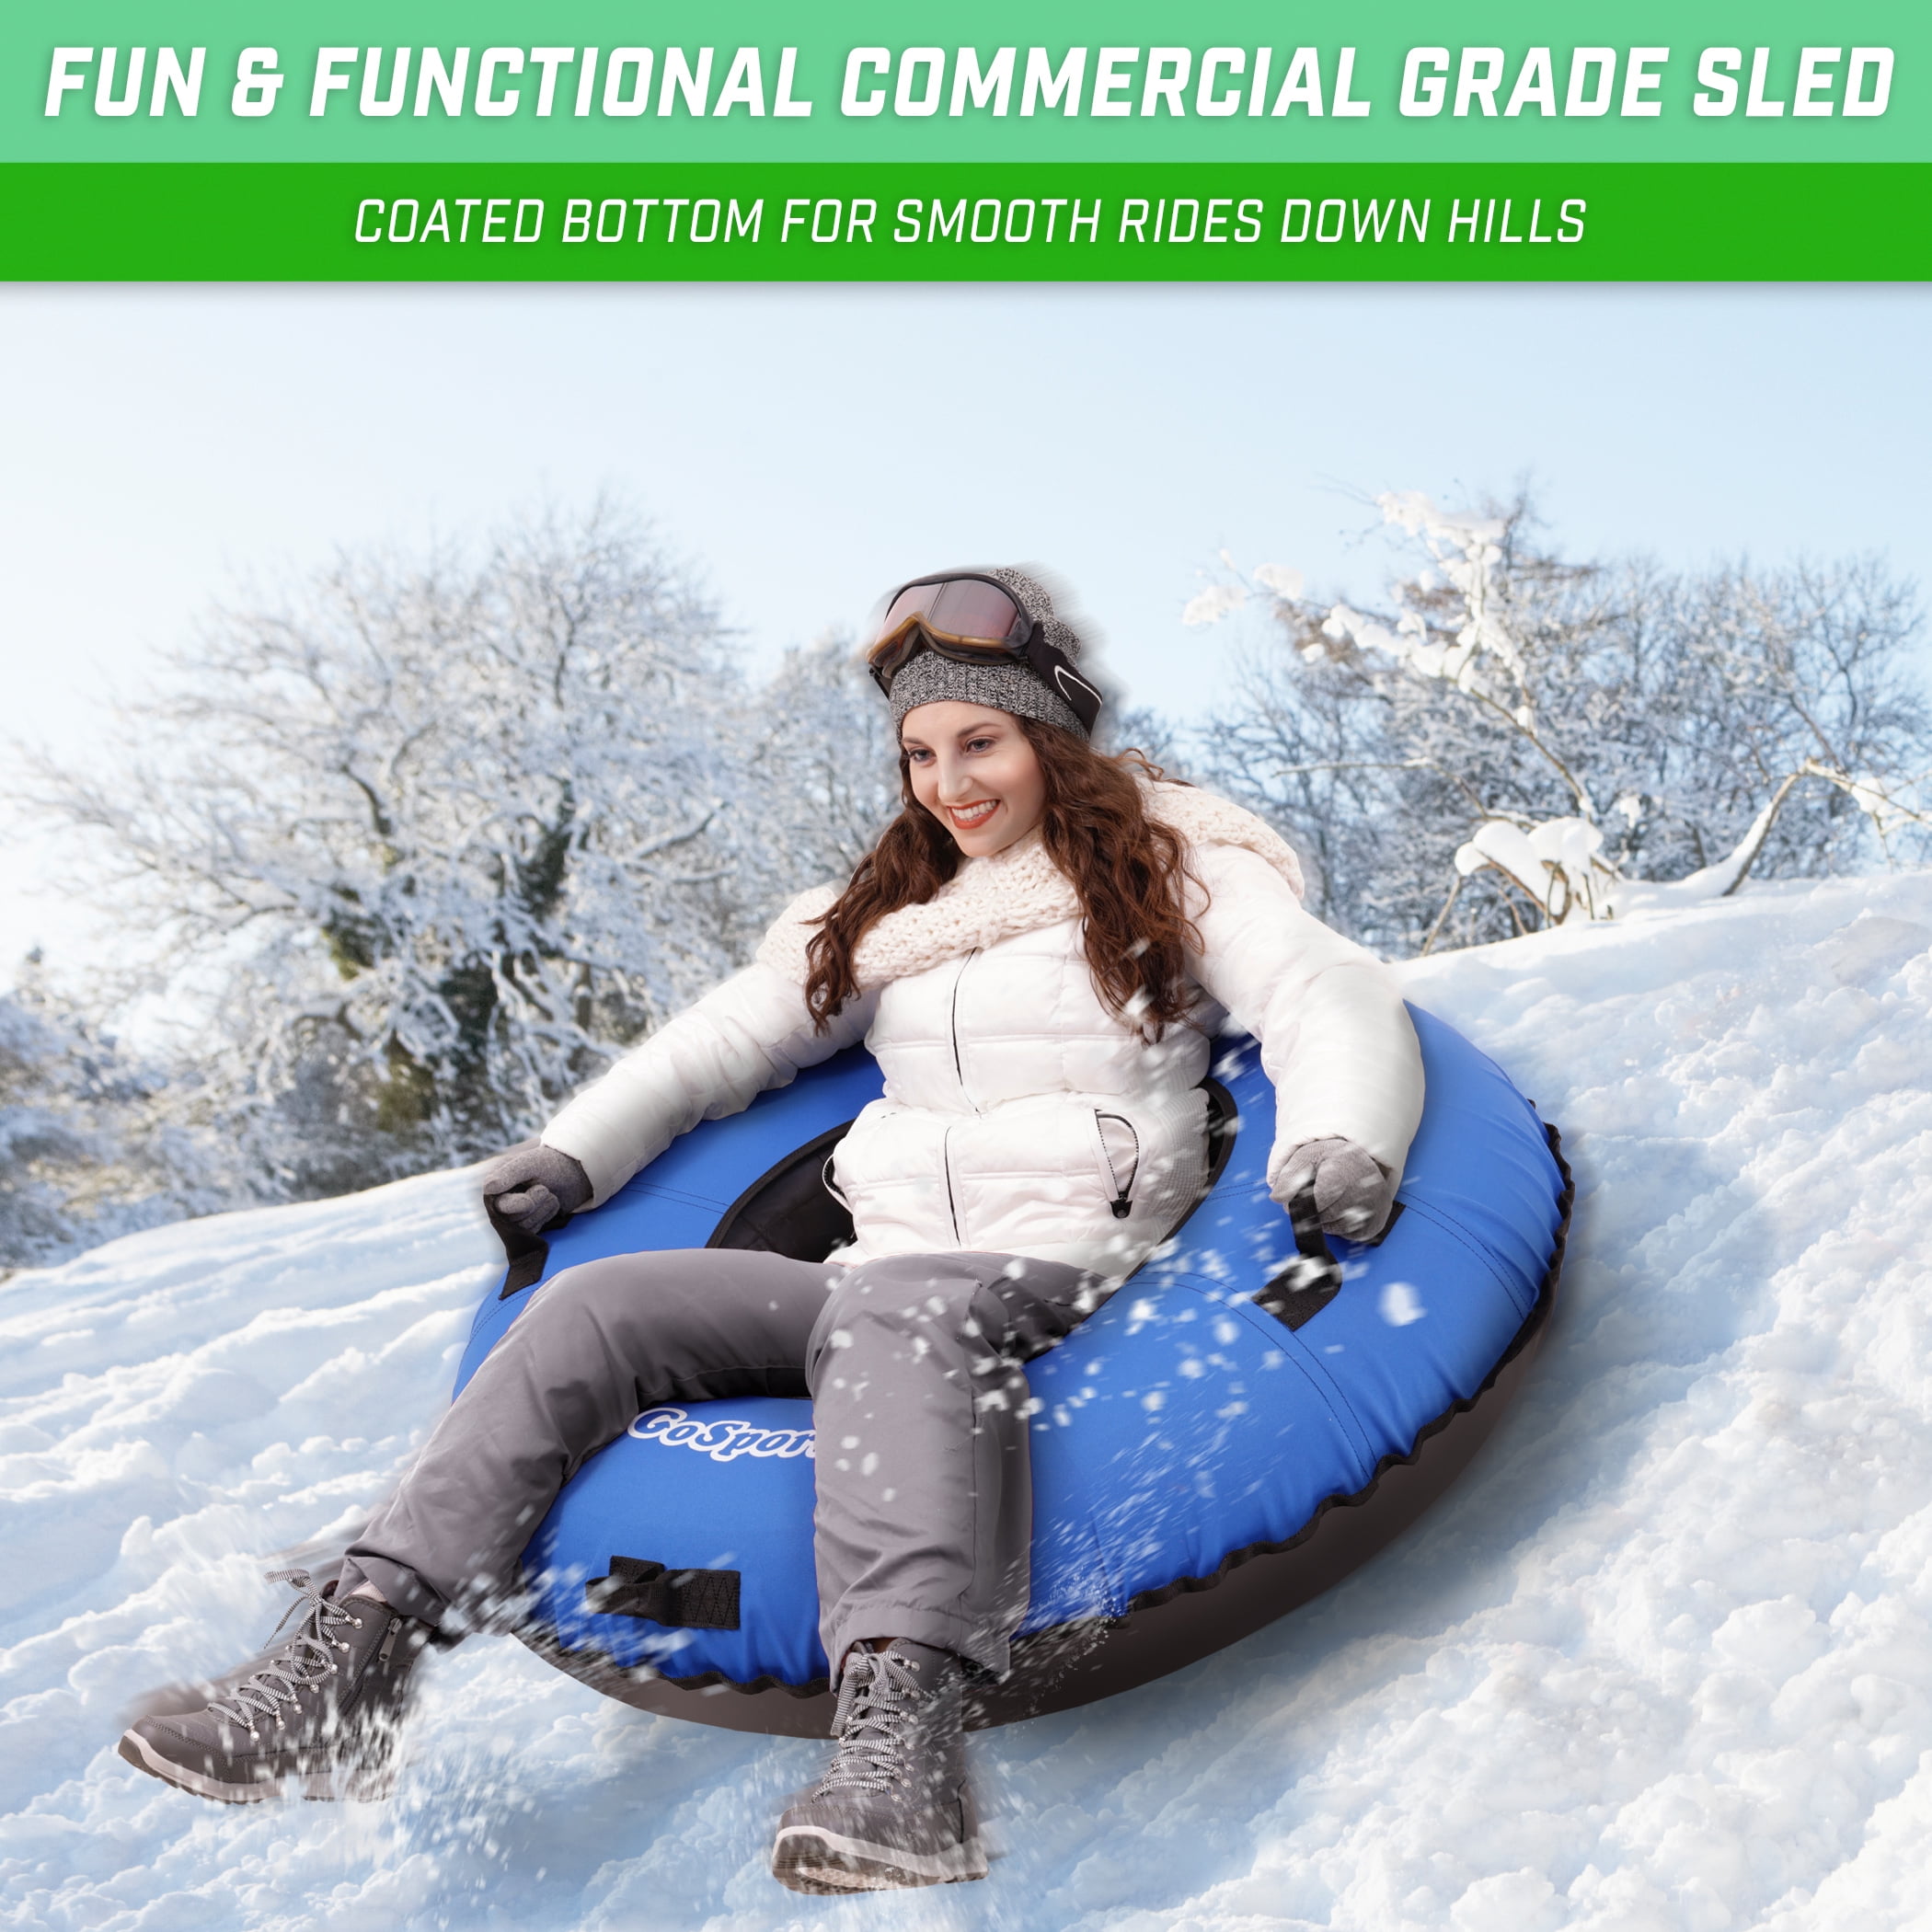 47.3 Large Heavy Duty PVC Snow Backrest Sledding Tube with 2 Handles for Adults & Kids Winter Outdoor Fun Entertainment IPHUNGO Inflatable Snow Tube